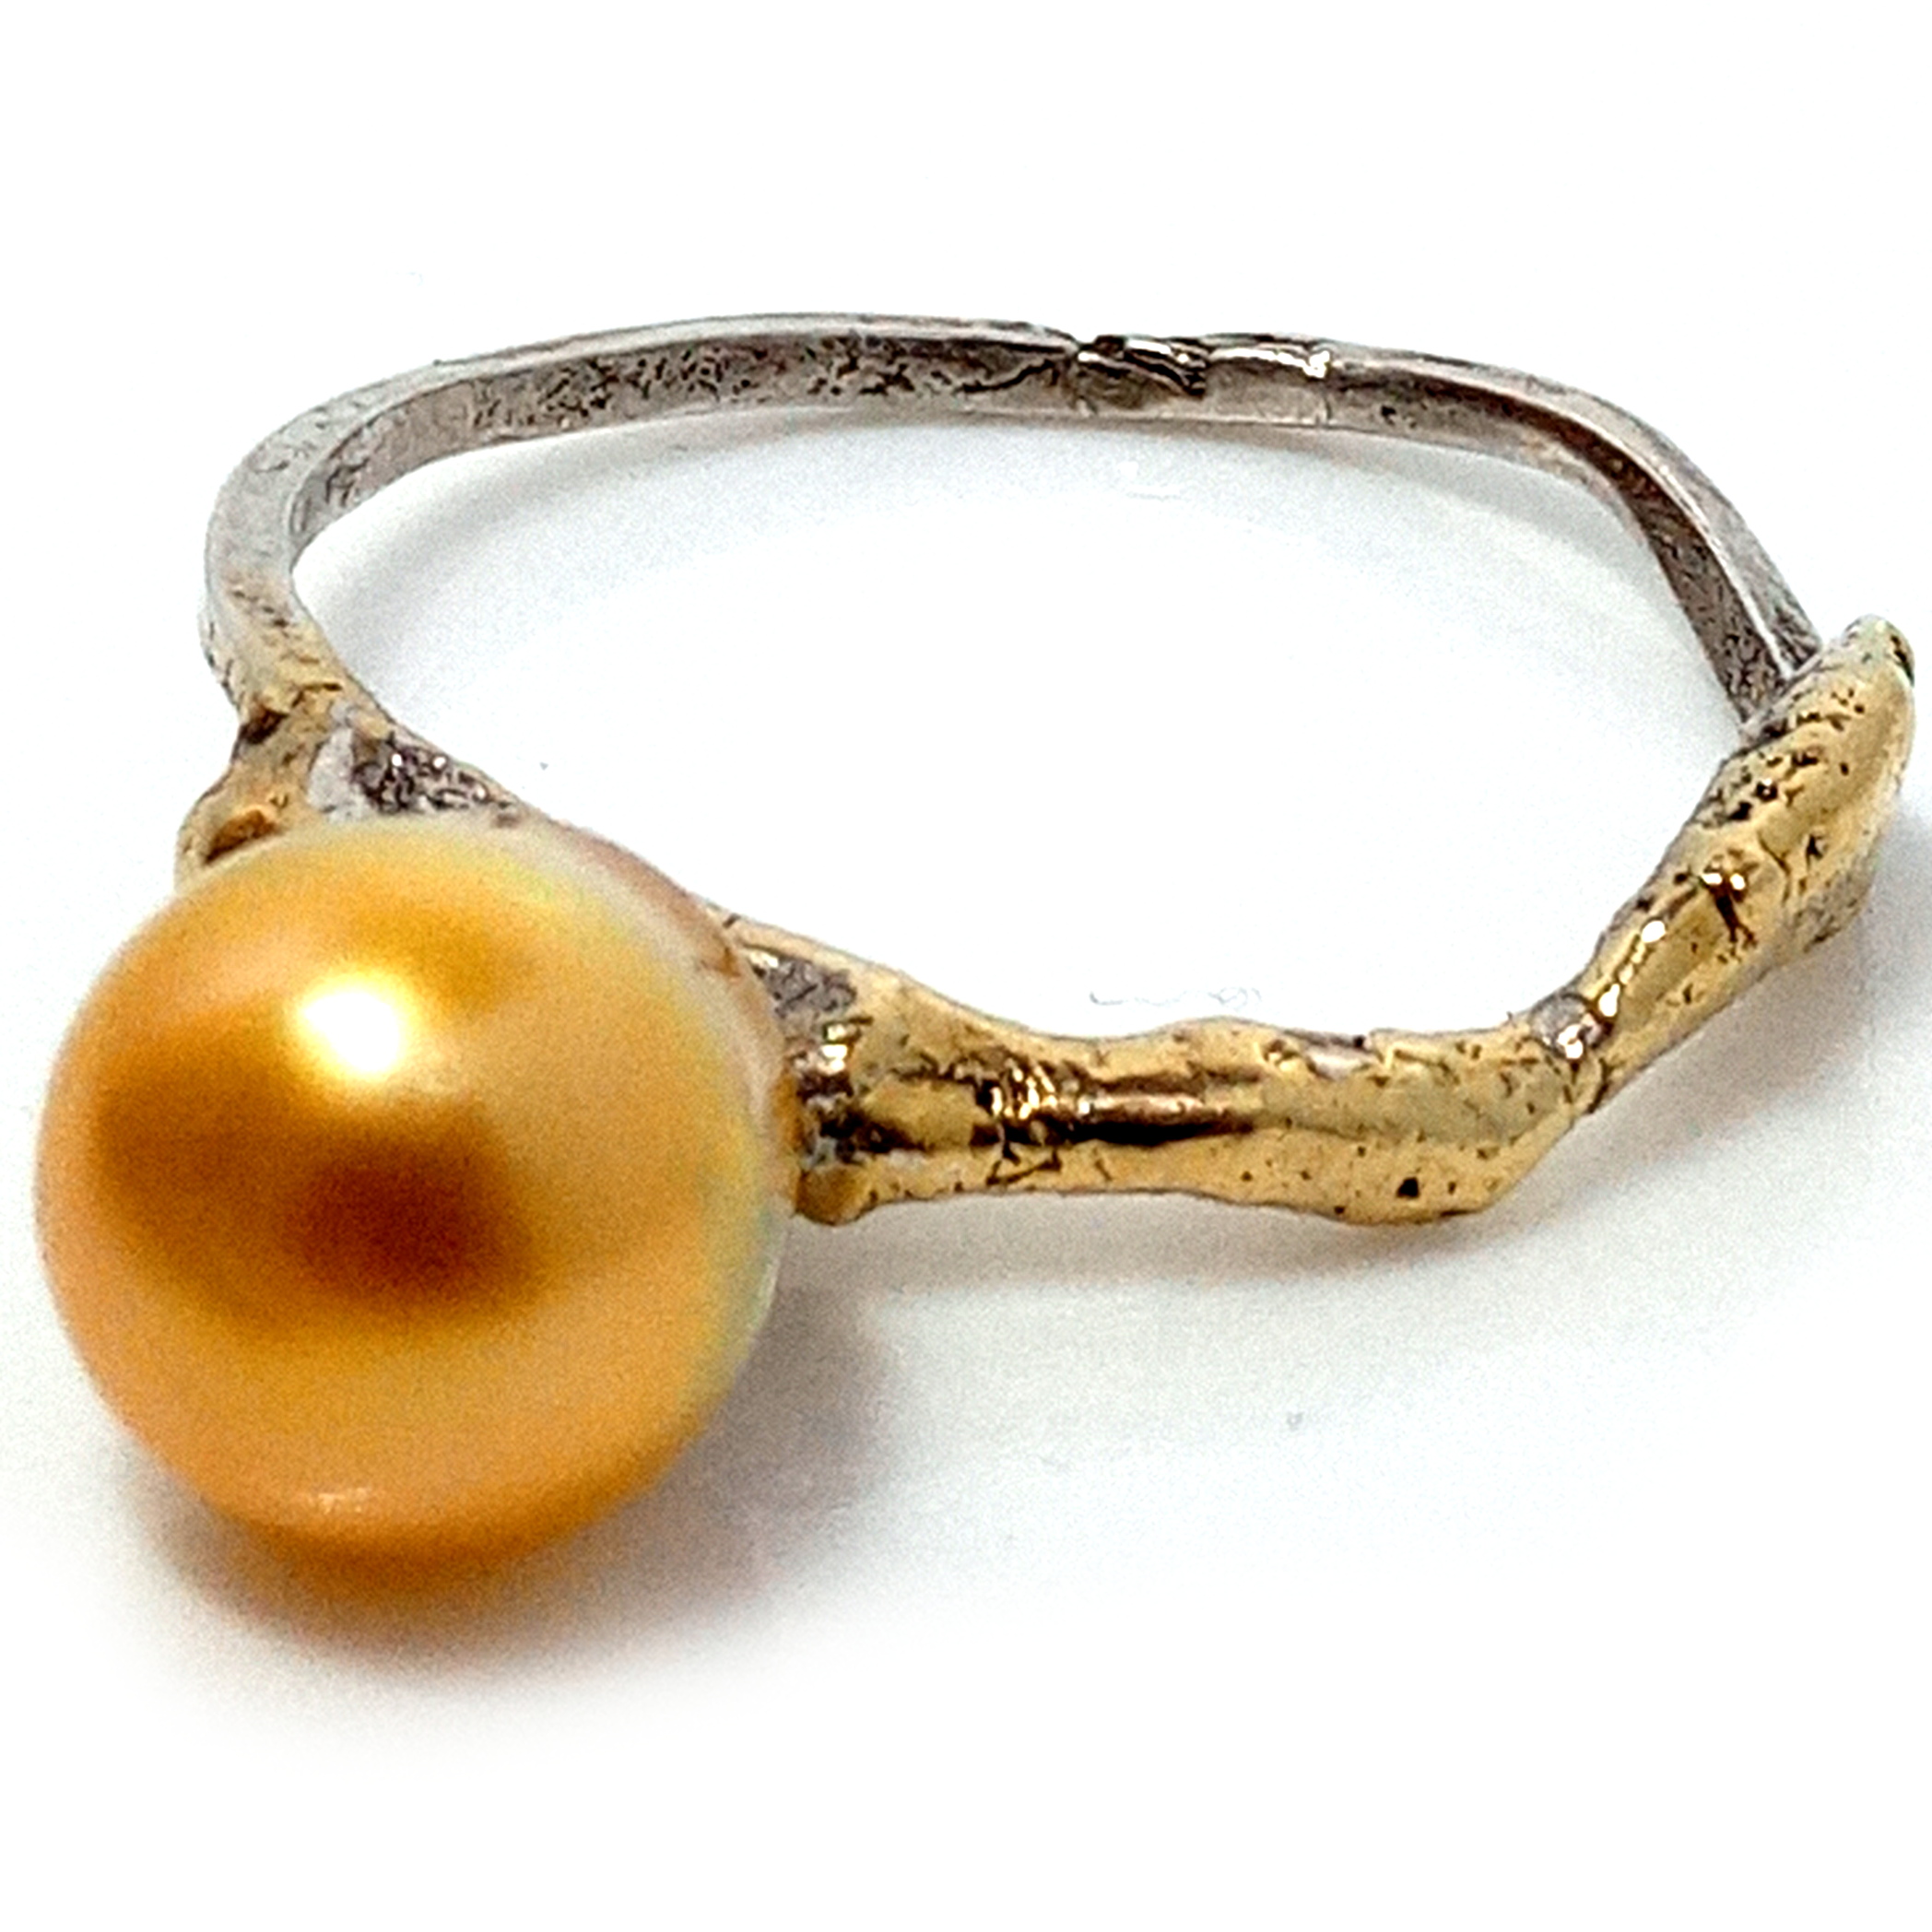 Fused Silver and Vermeil Ring with Metallic Pale Gold South Sea